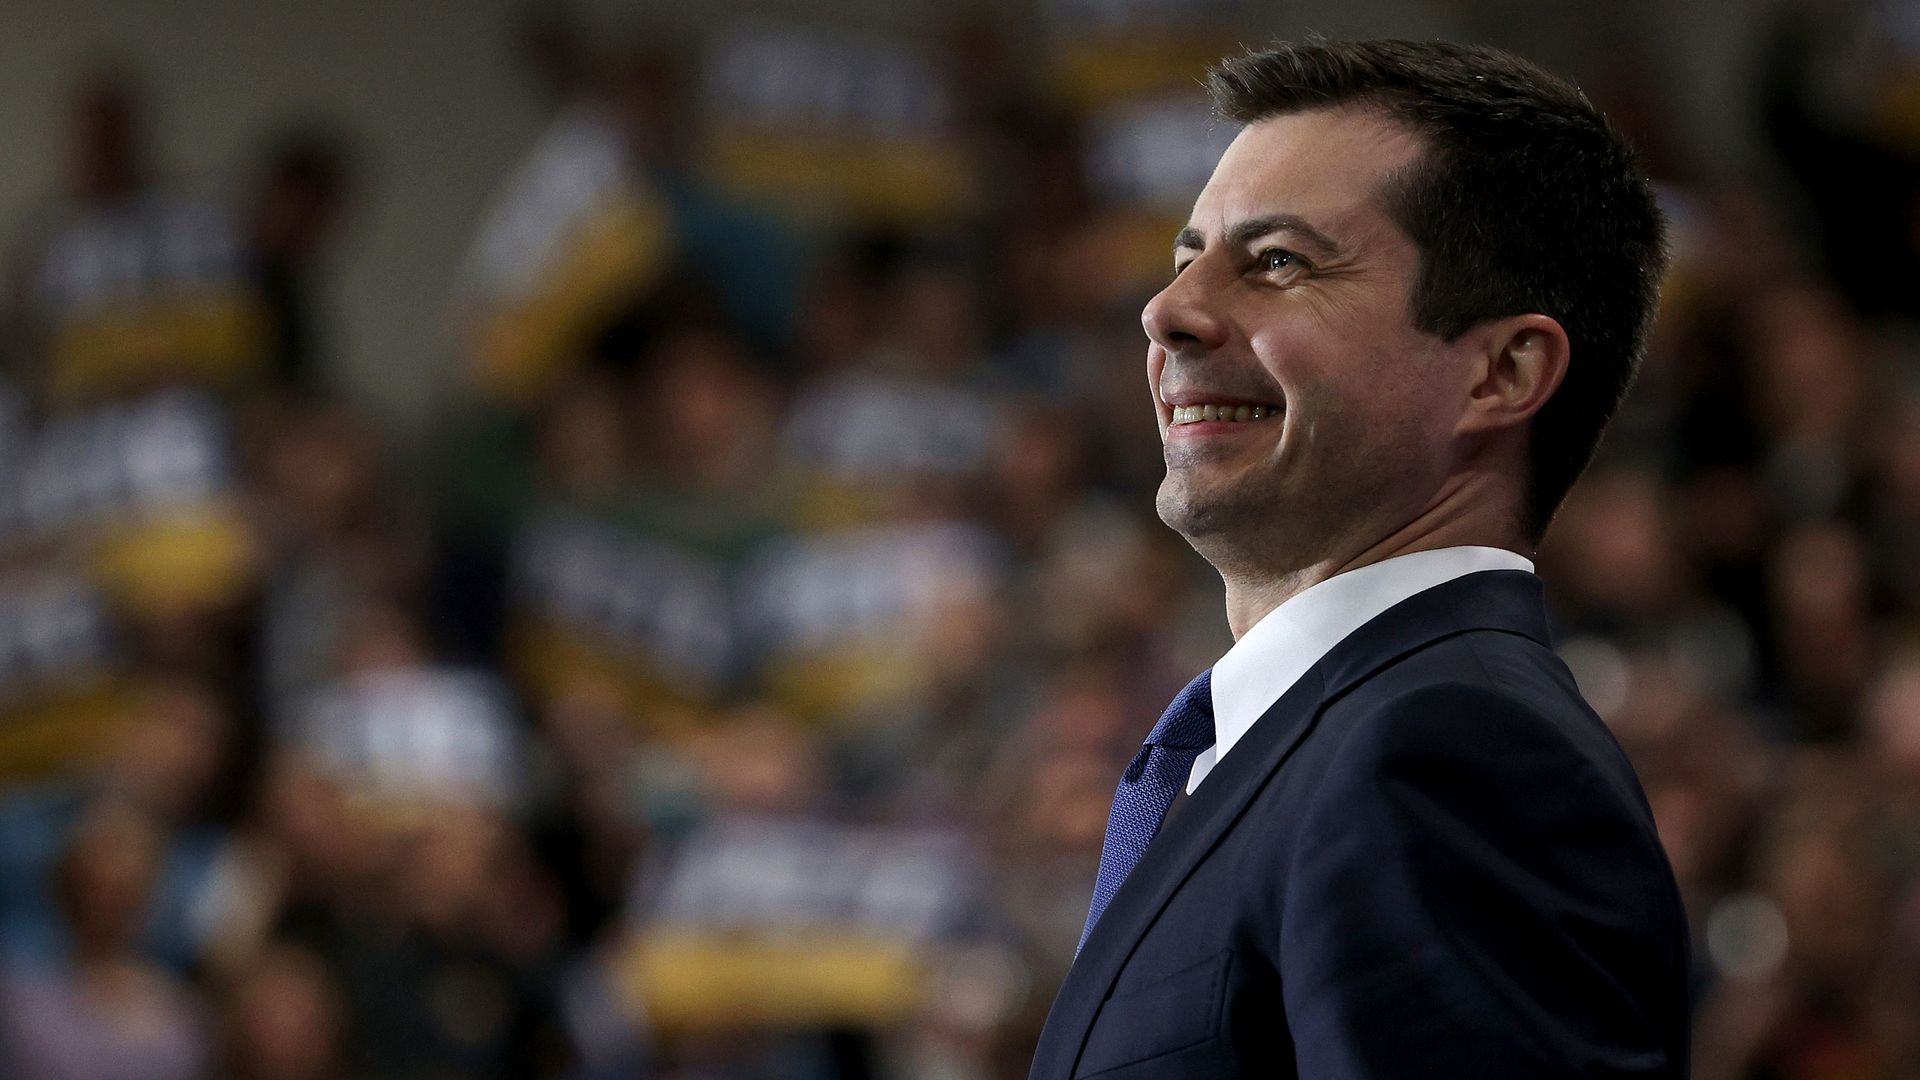  Democratic presidential candidate former South Bend, Indiana Mayor Pete Buttigieg speaks at town hall campaign event at Needham Broughton High School February 29